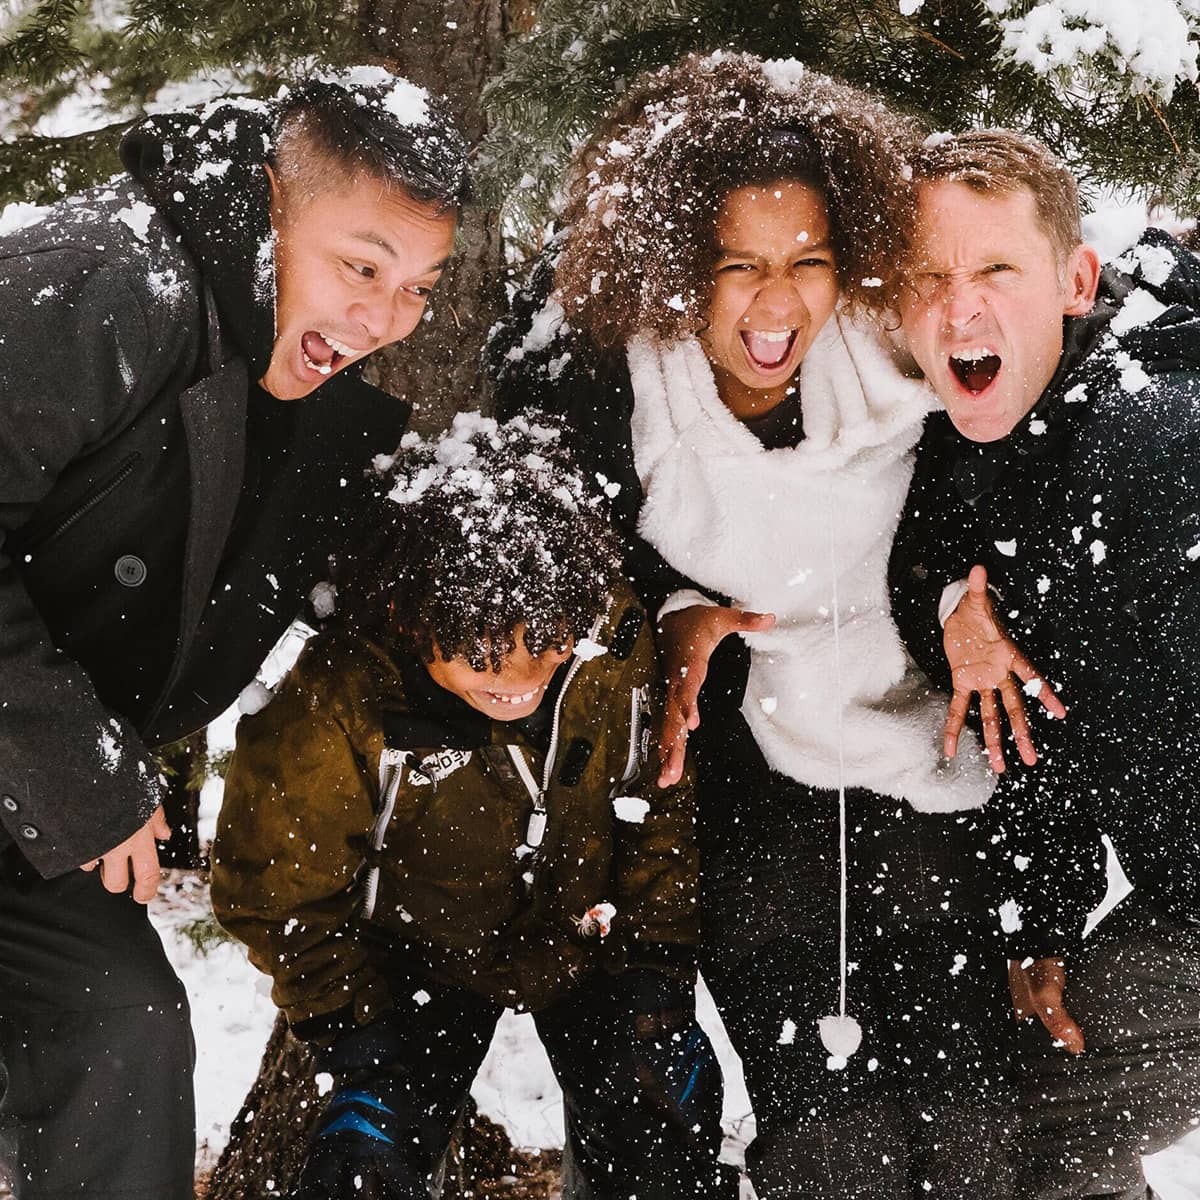 Kids screaming as they play in the snow